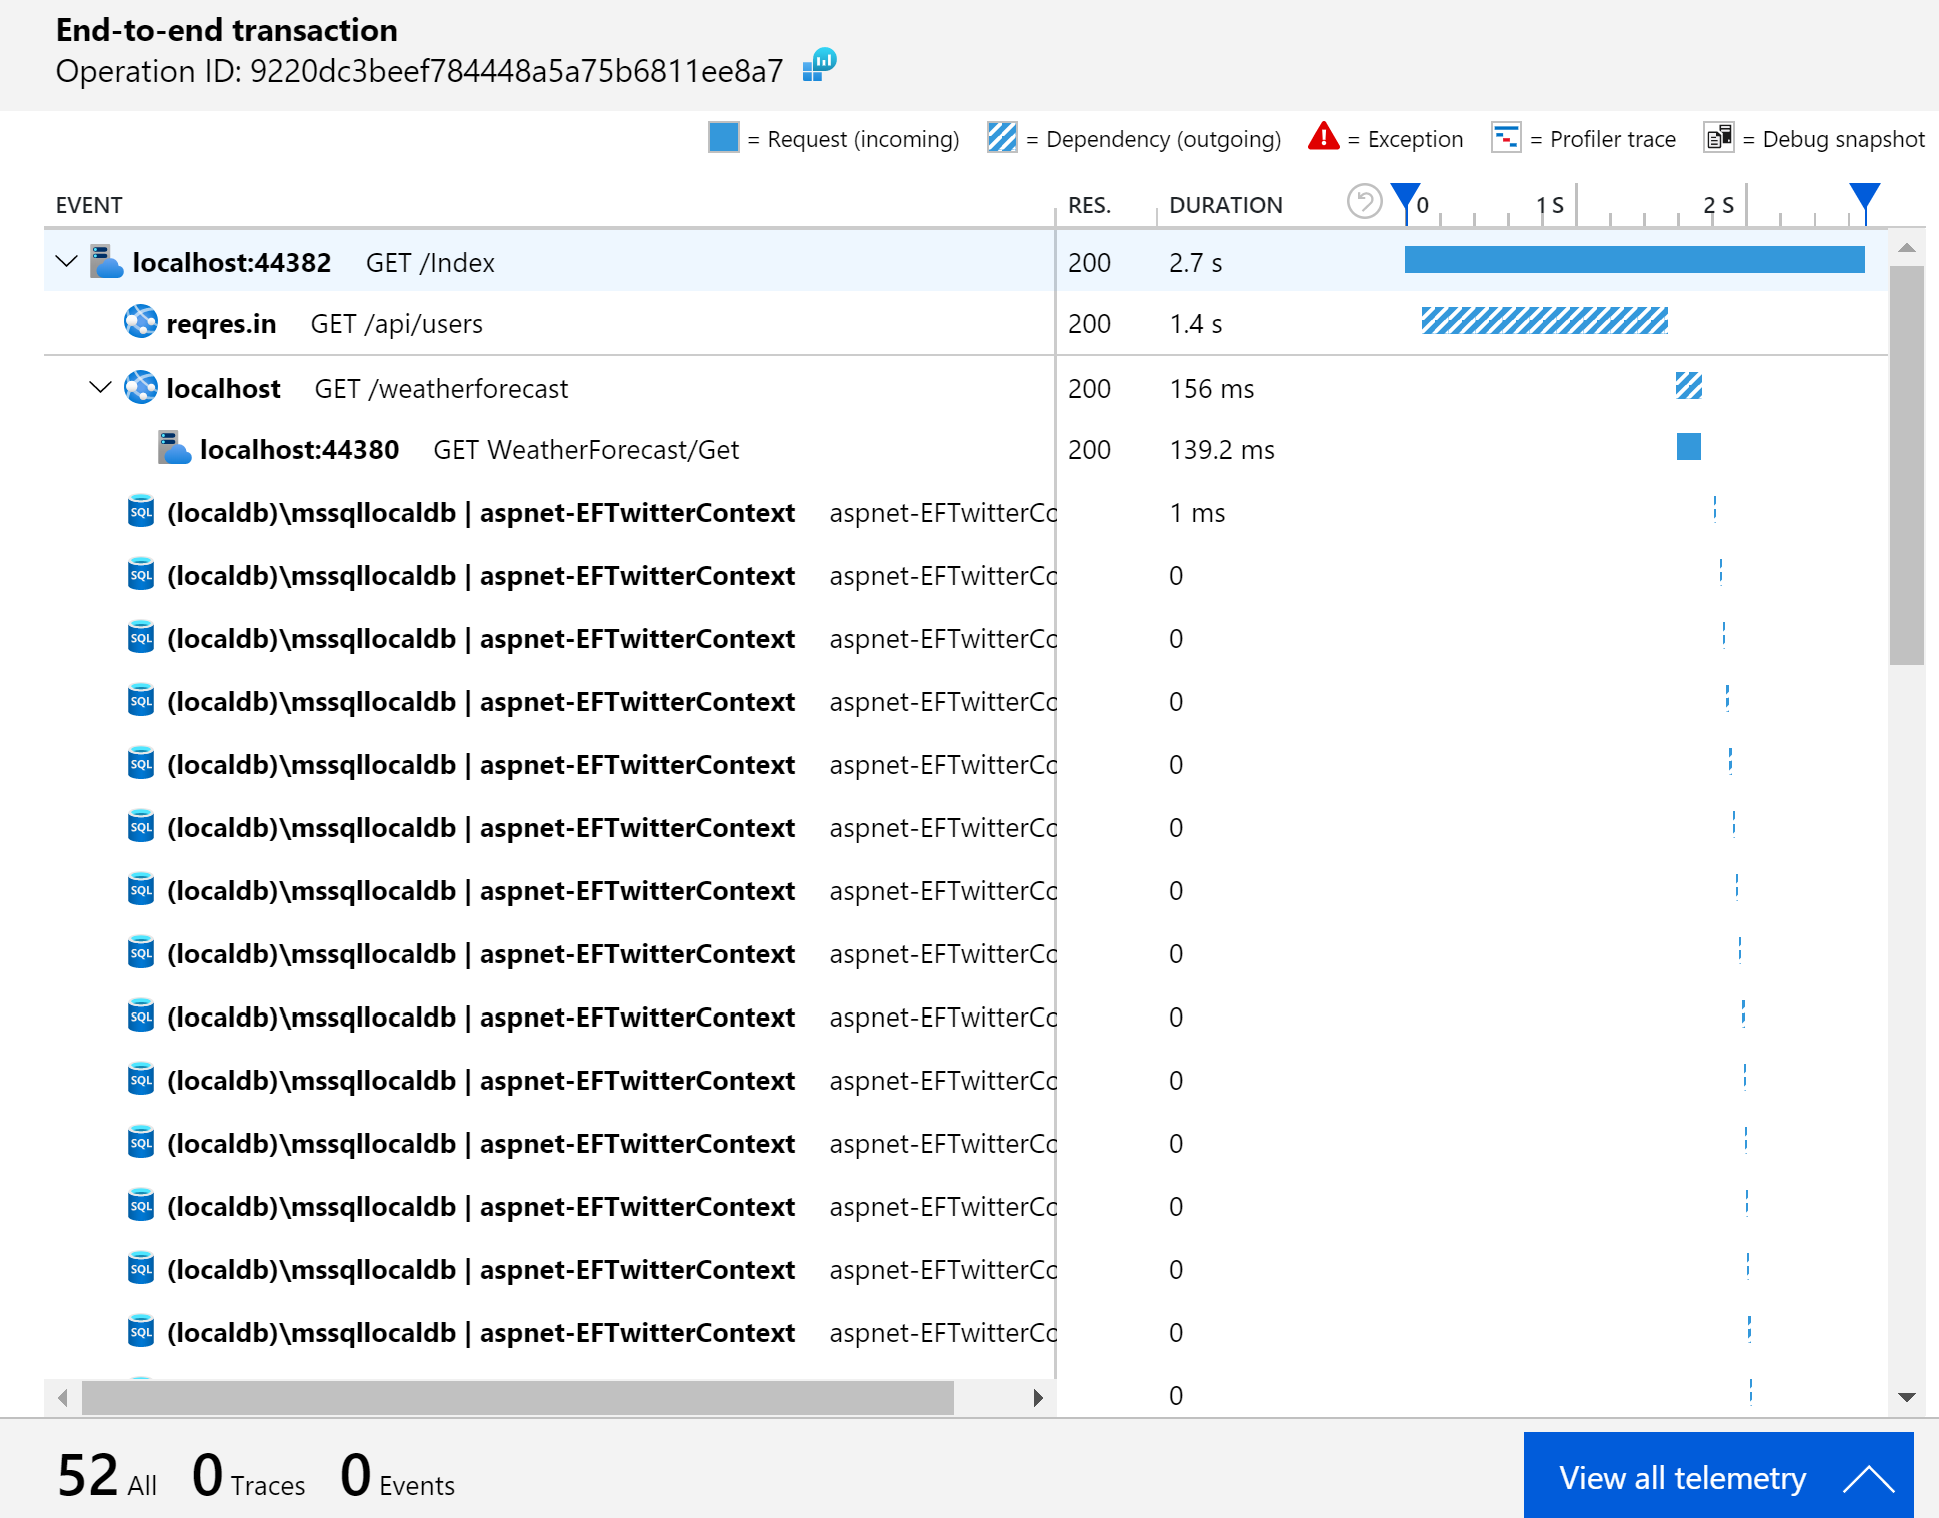 End-to-end transaction view showing an excess number of calls to SQL Server